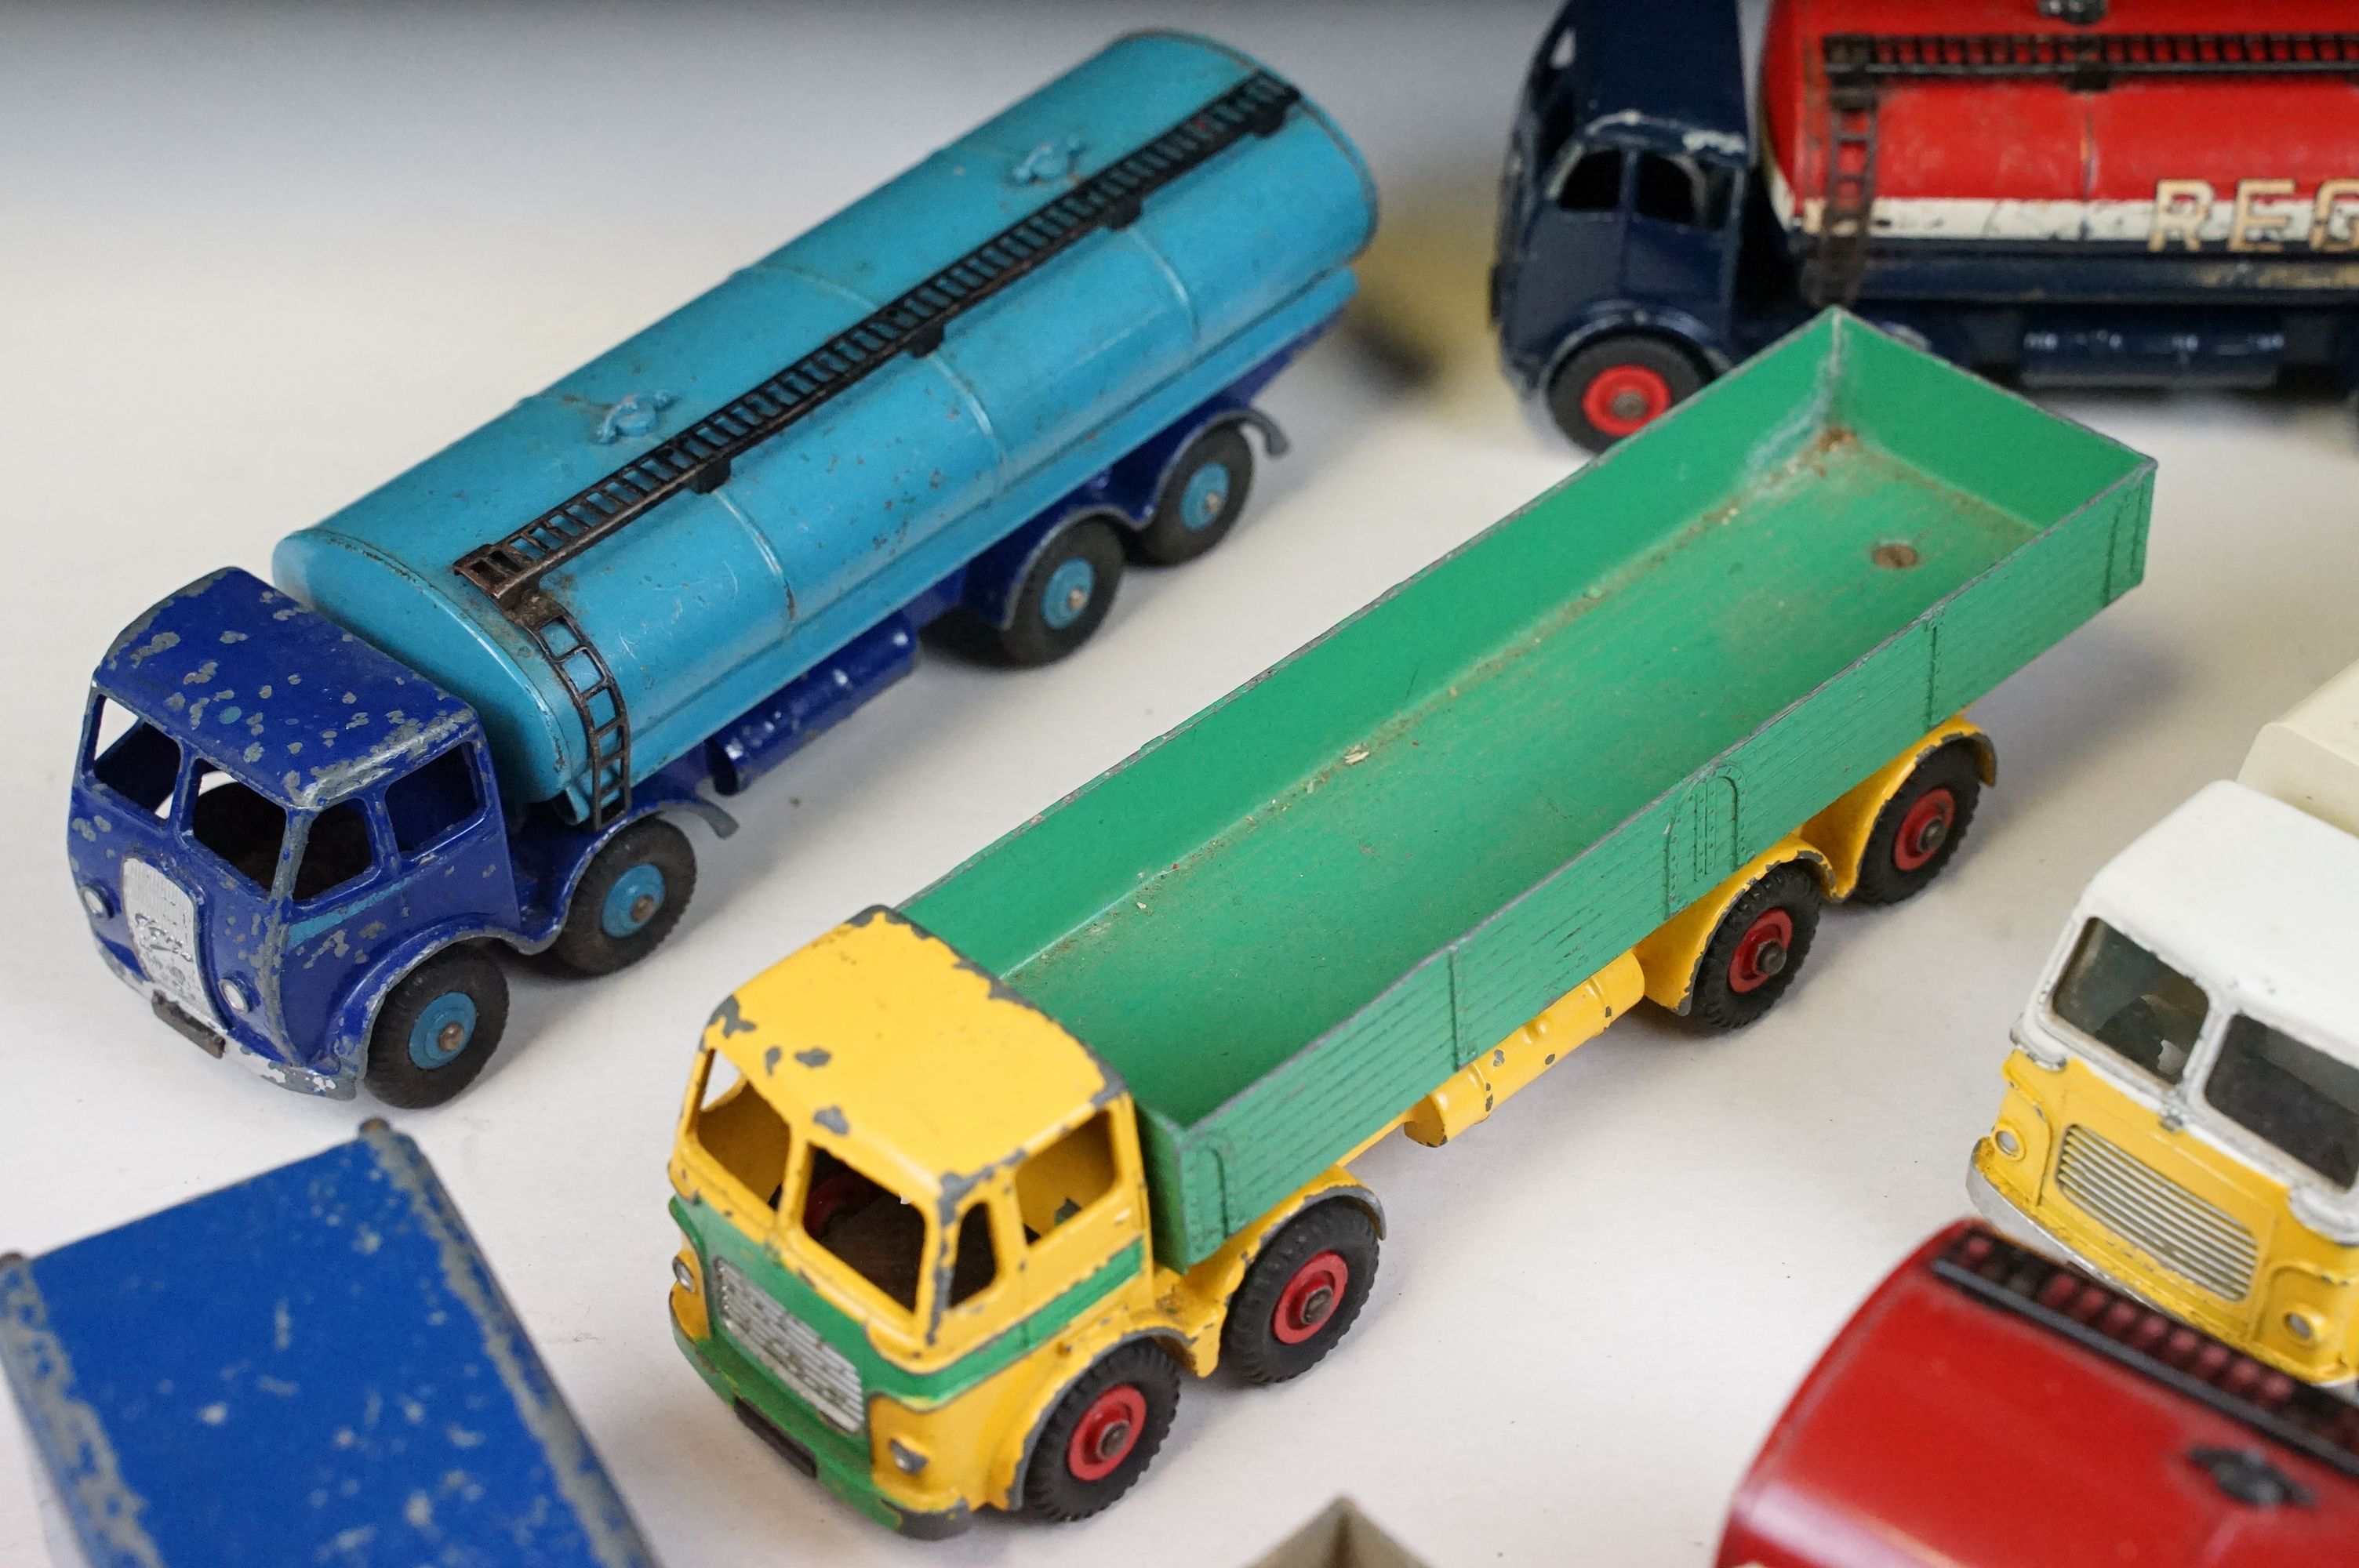 12 Mid 20th C Dinky diecast models to include Foden Fuel Tanker in Two-Tone light blue and dark blue - Image 7 of 9